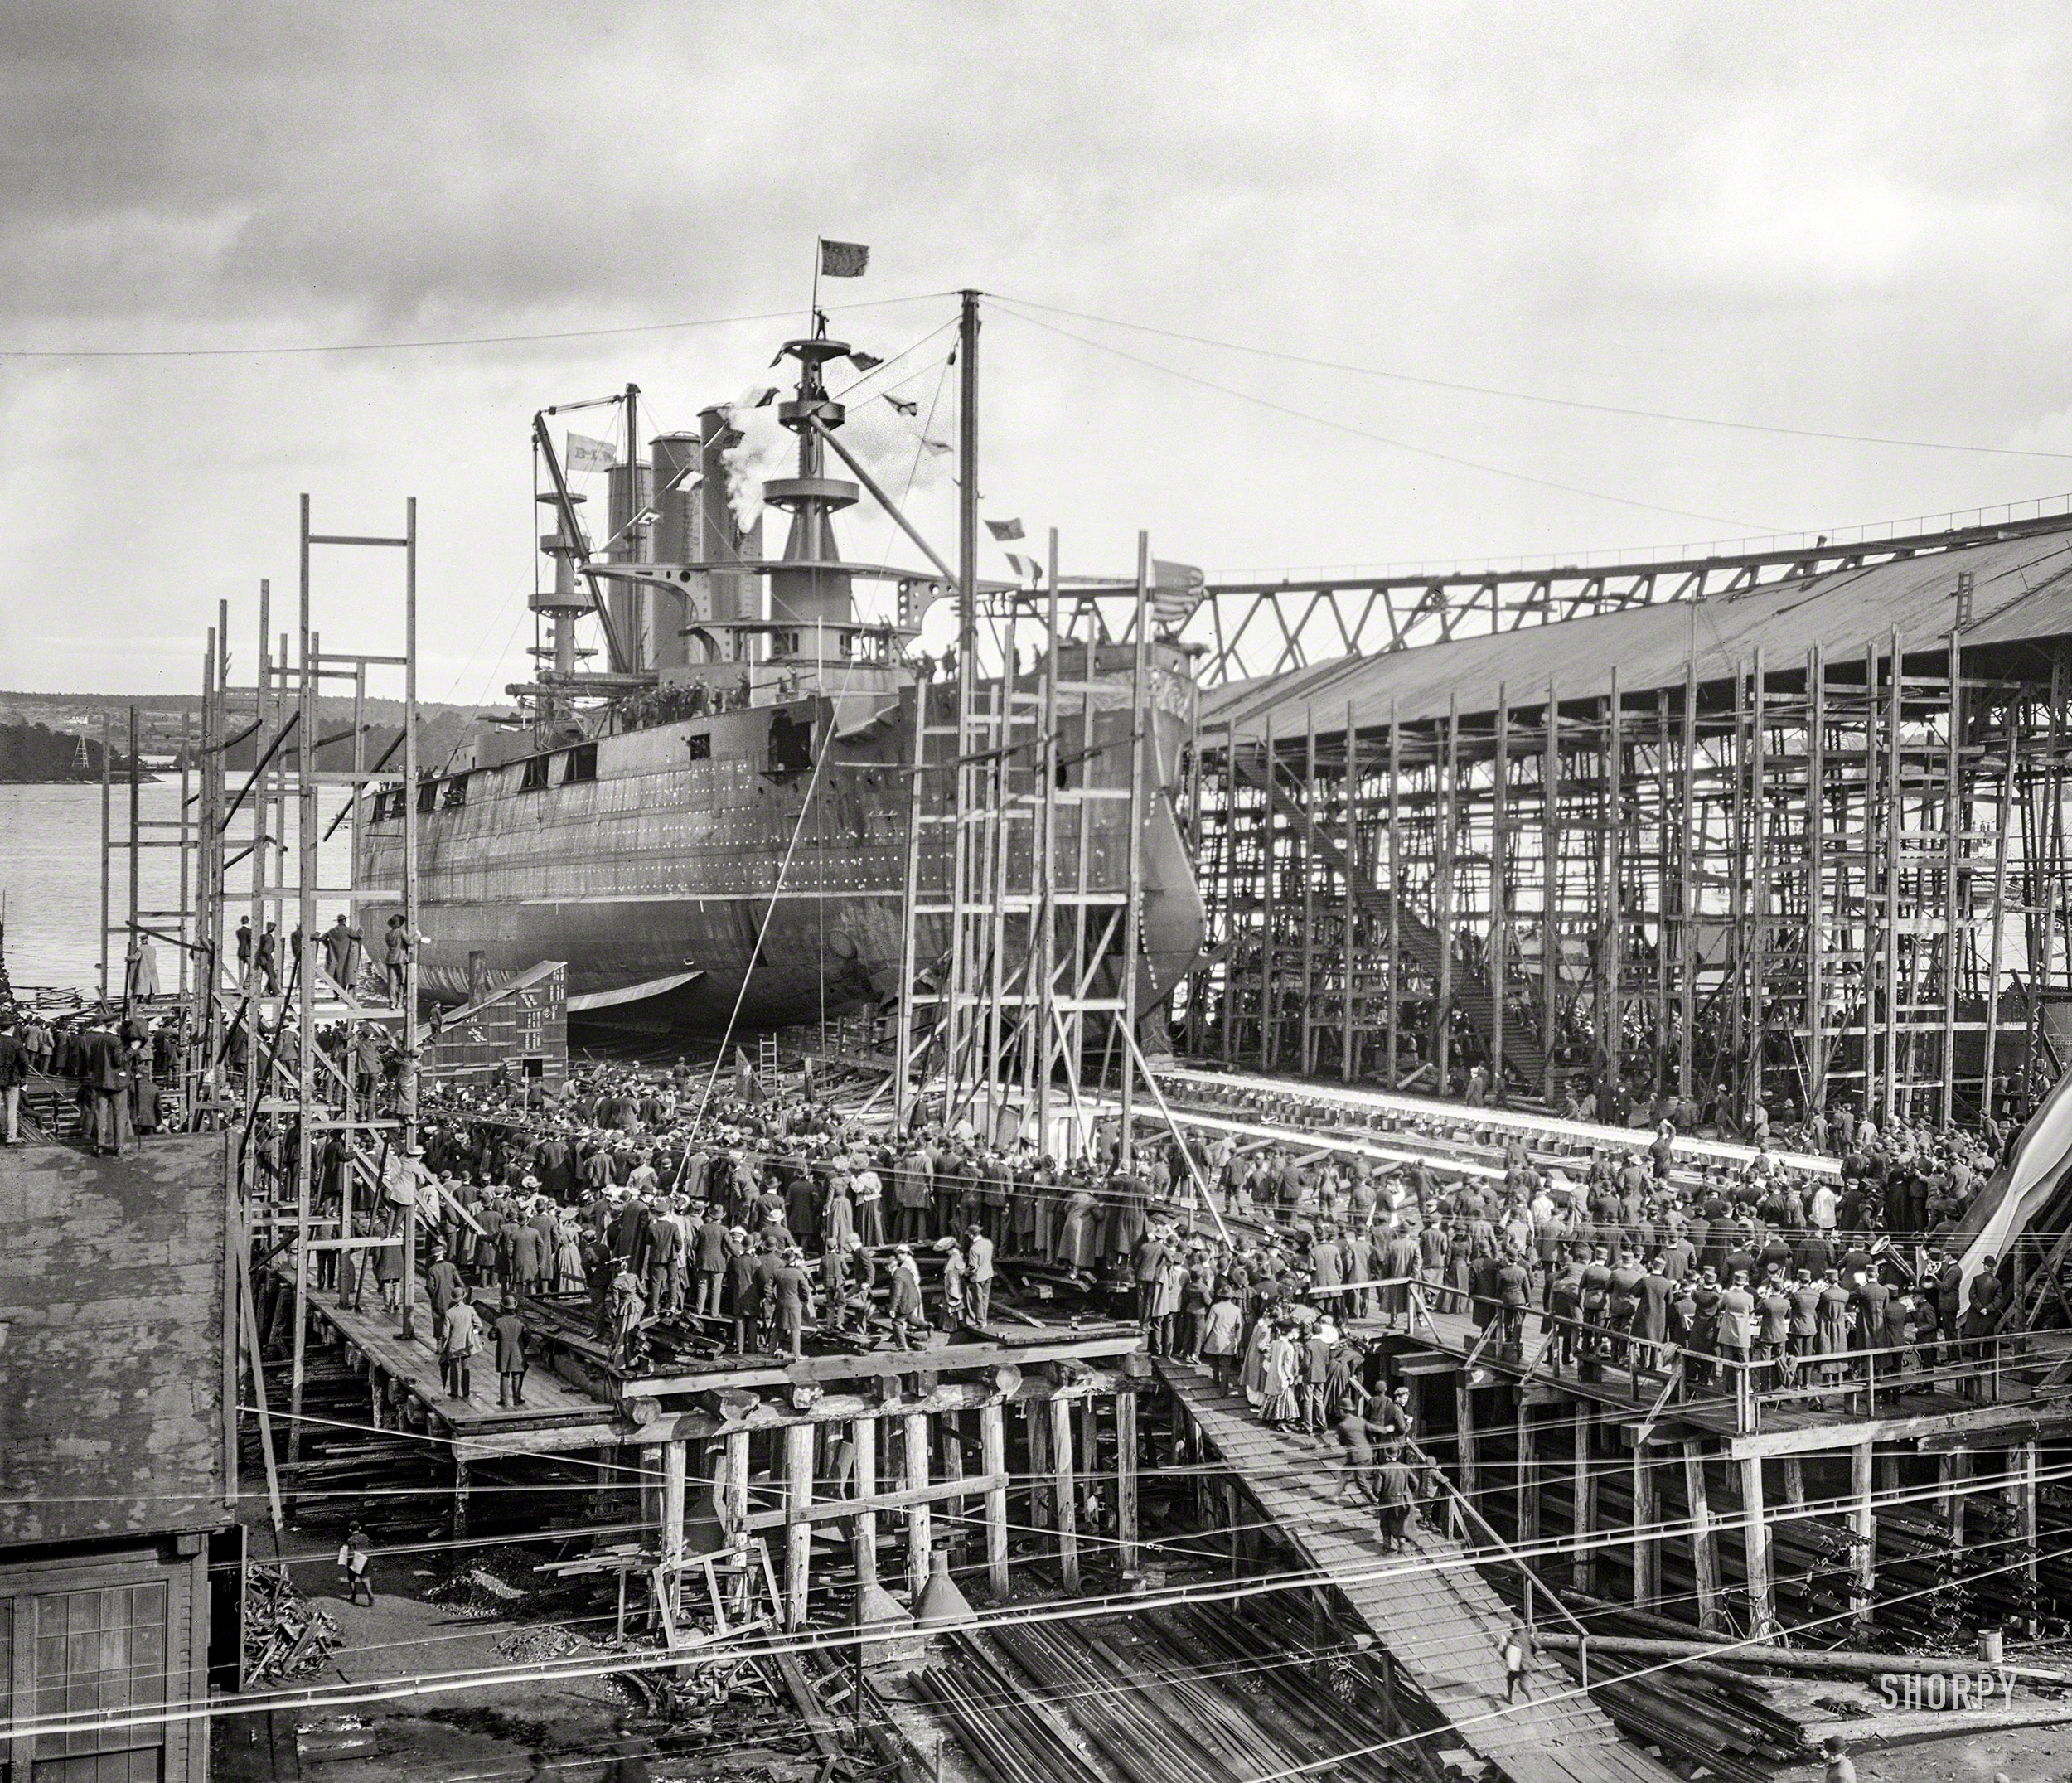 October 11, 1904. Bath, Maine. "Launch of the battleship U.S.S. Georgia at Bath Iron Works." 8x10 inch dry plate glass negative. View full size.